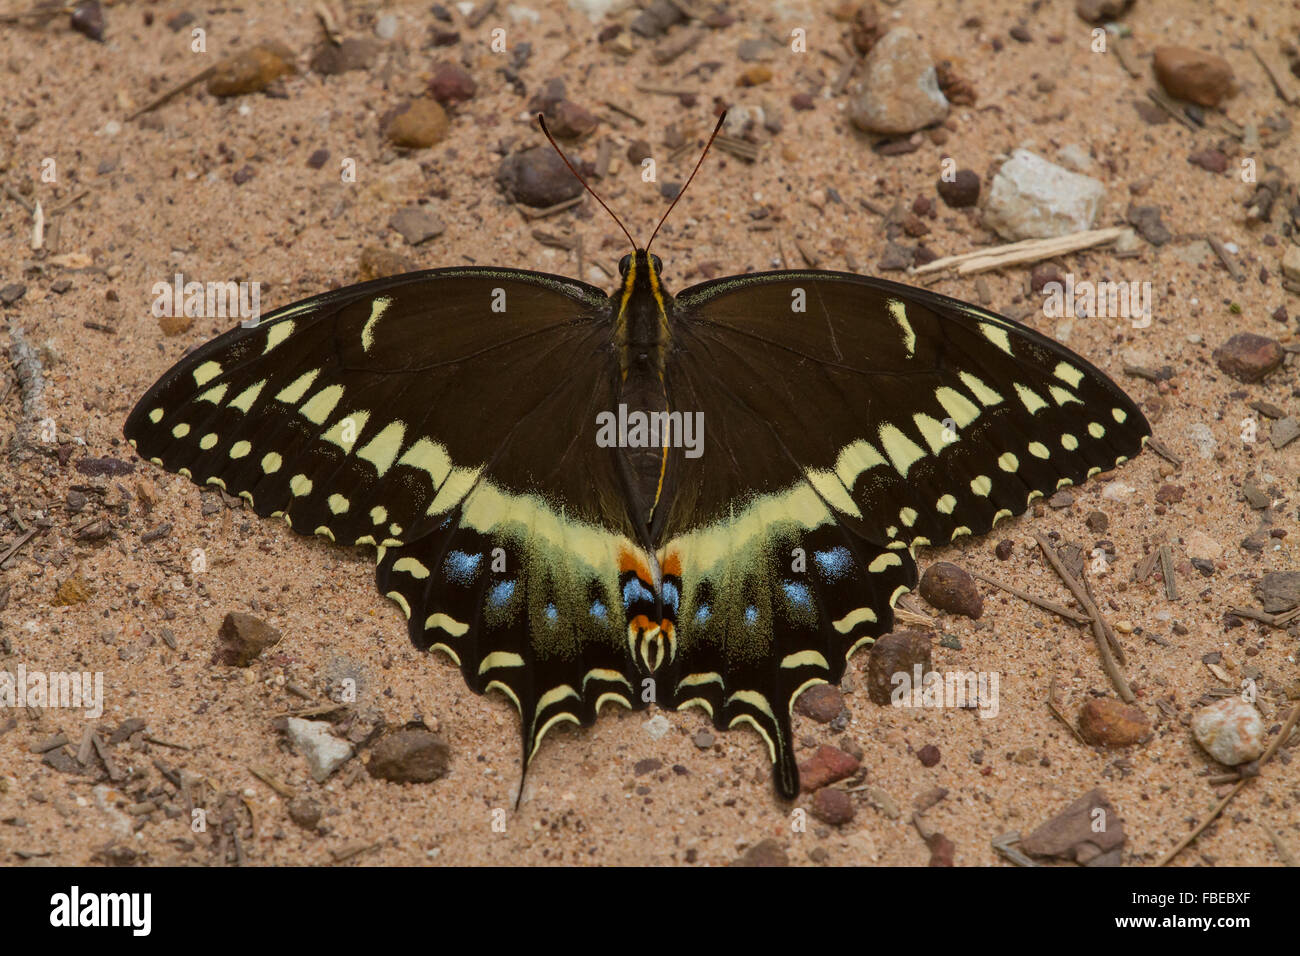 A fresh Palamedes Swallowtail, Papilio palamedes, butterfly on a dirt road. Stock Photo